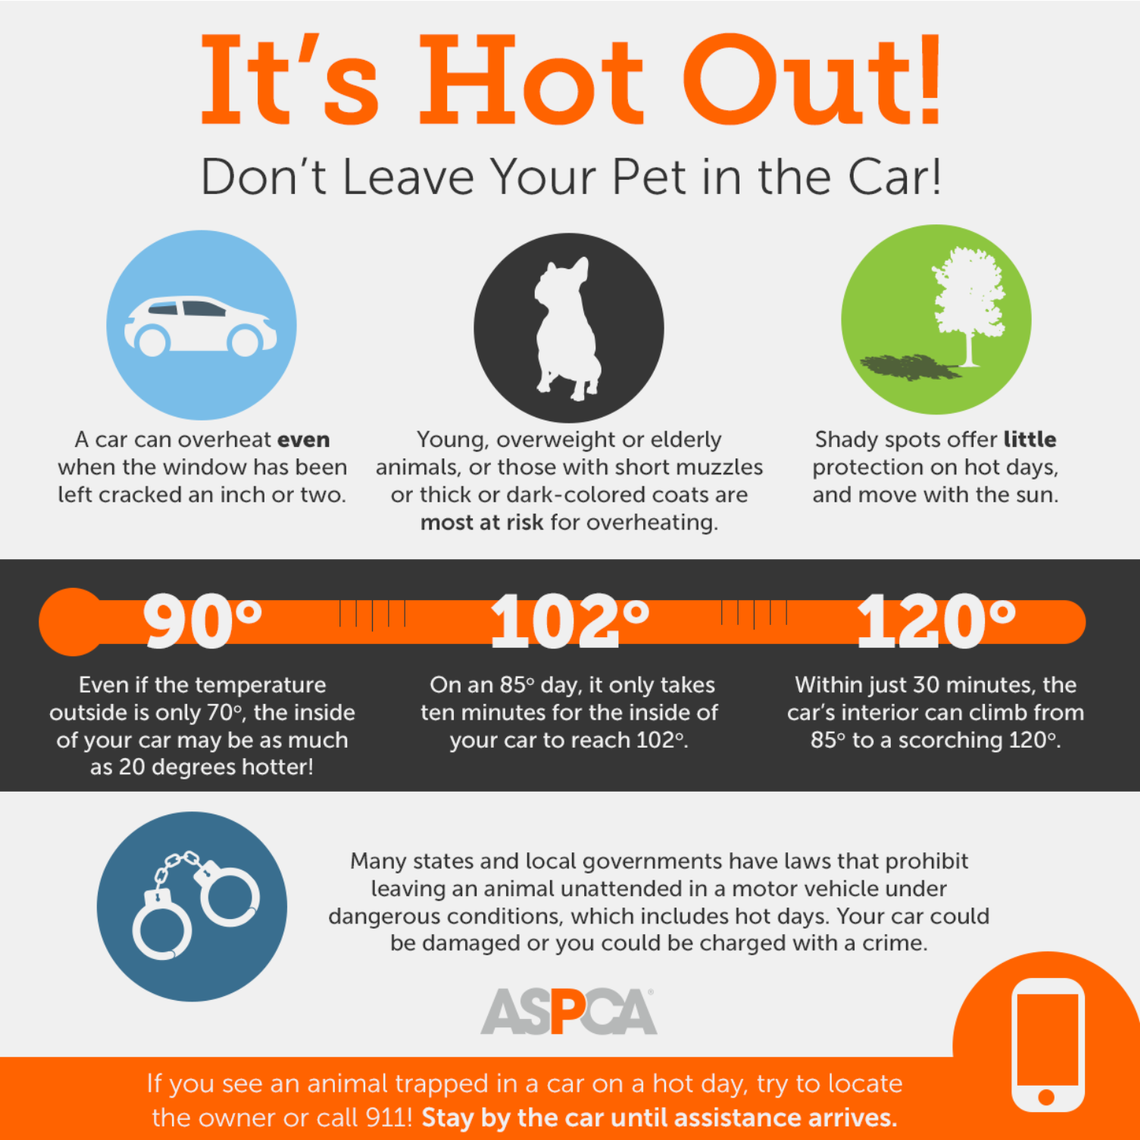 Graphic from the American Society for the Prevention of Animal Cruelty. The inside of your car can be 20 degrees hotter than the outside even in 70 degree weather.